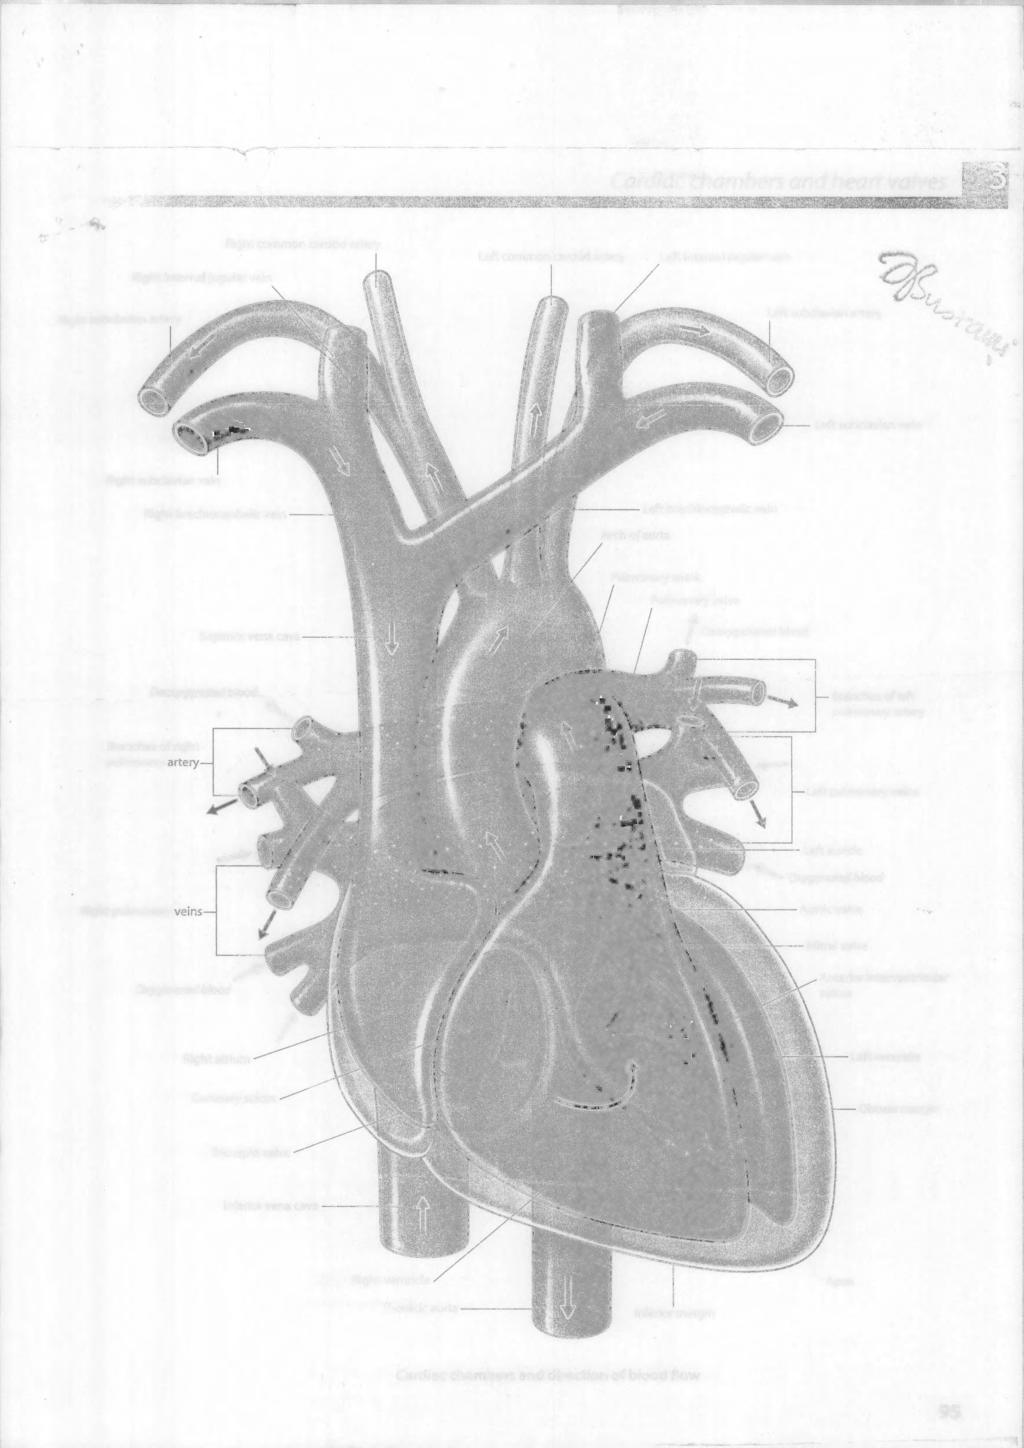 ... Cardioc charnbers and heart vaives Right common carotid artery Left common carotid artery Left intemal